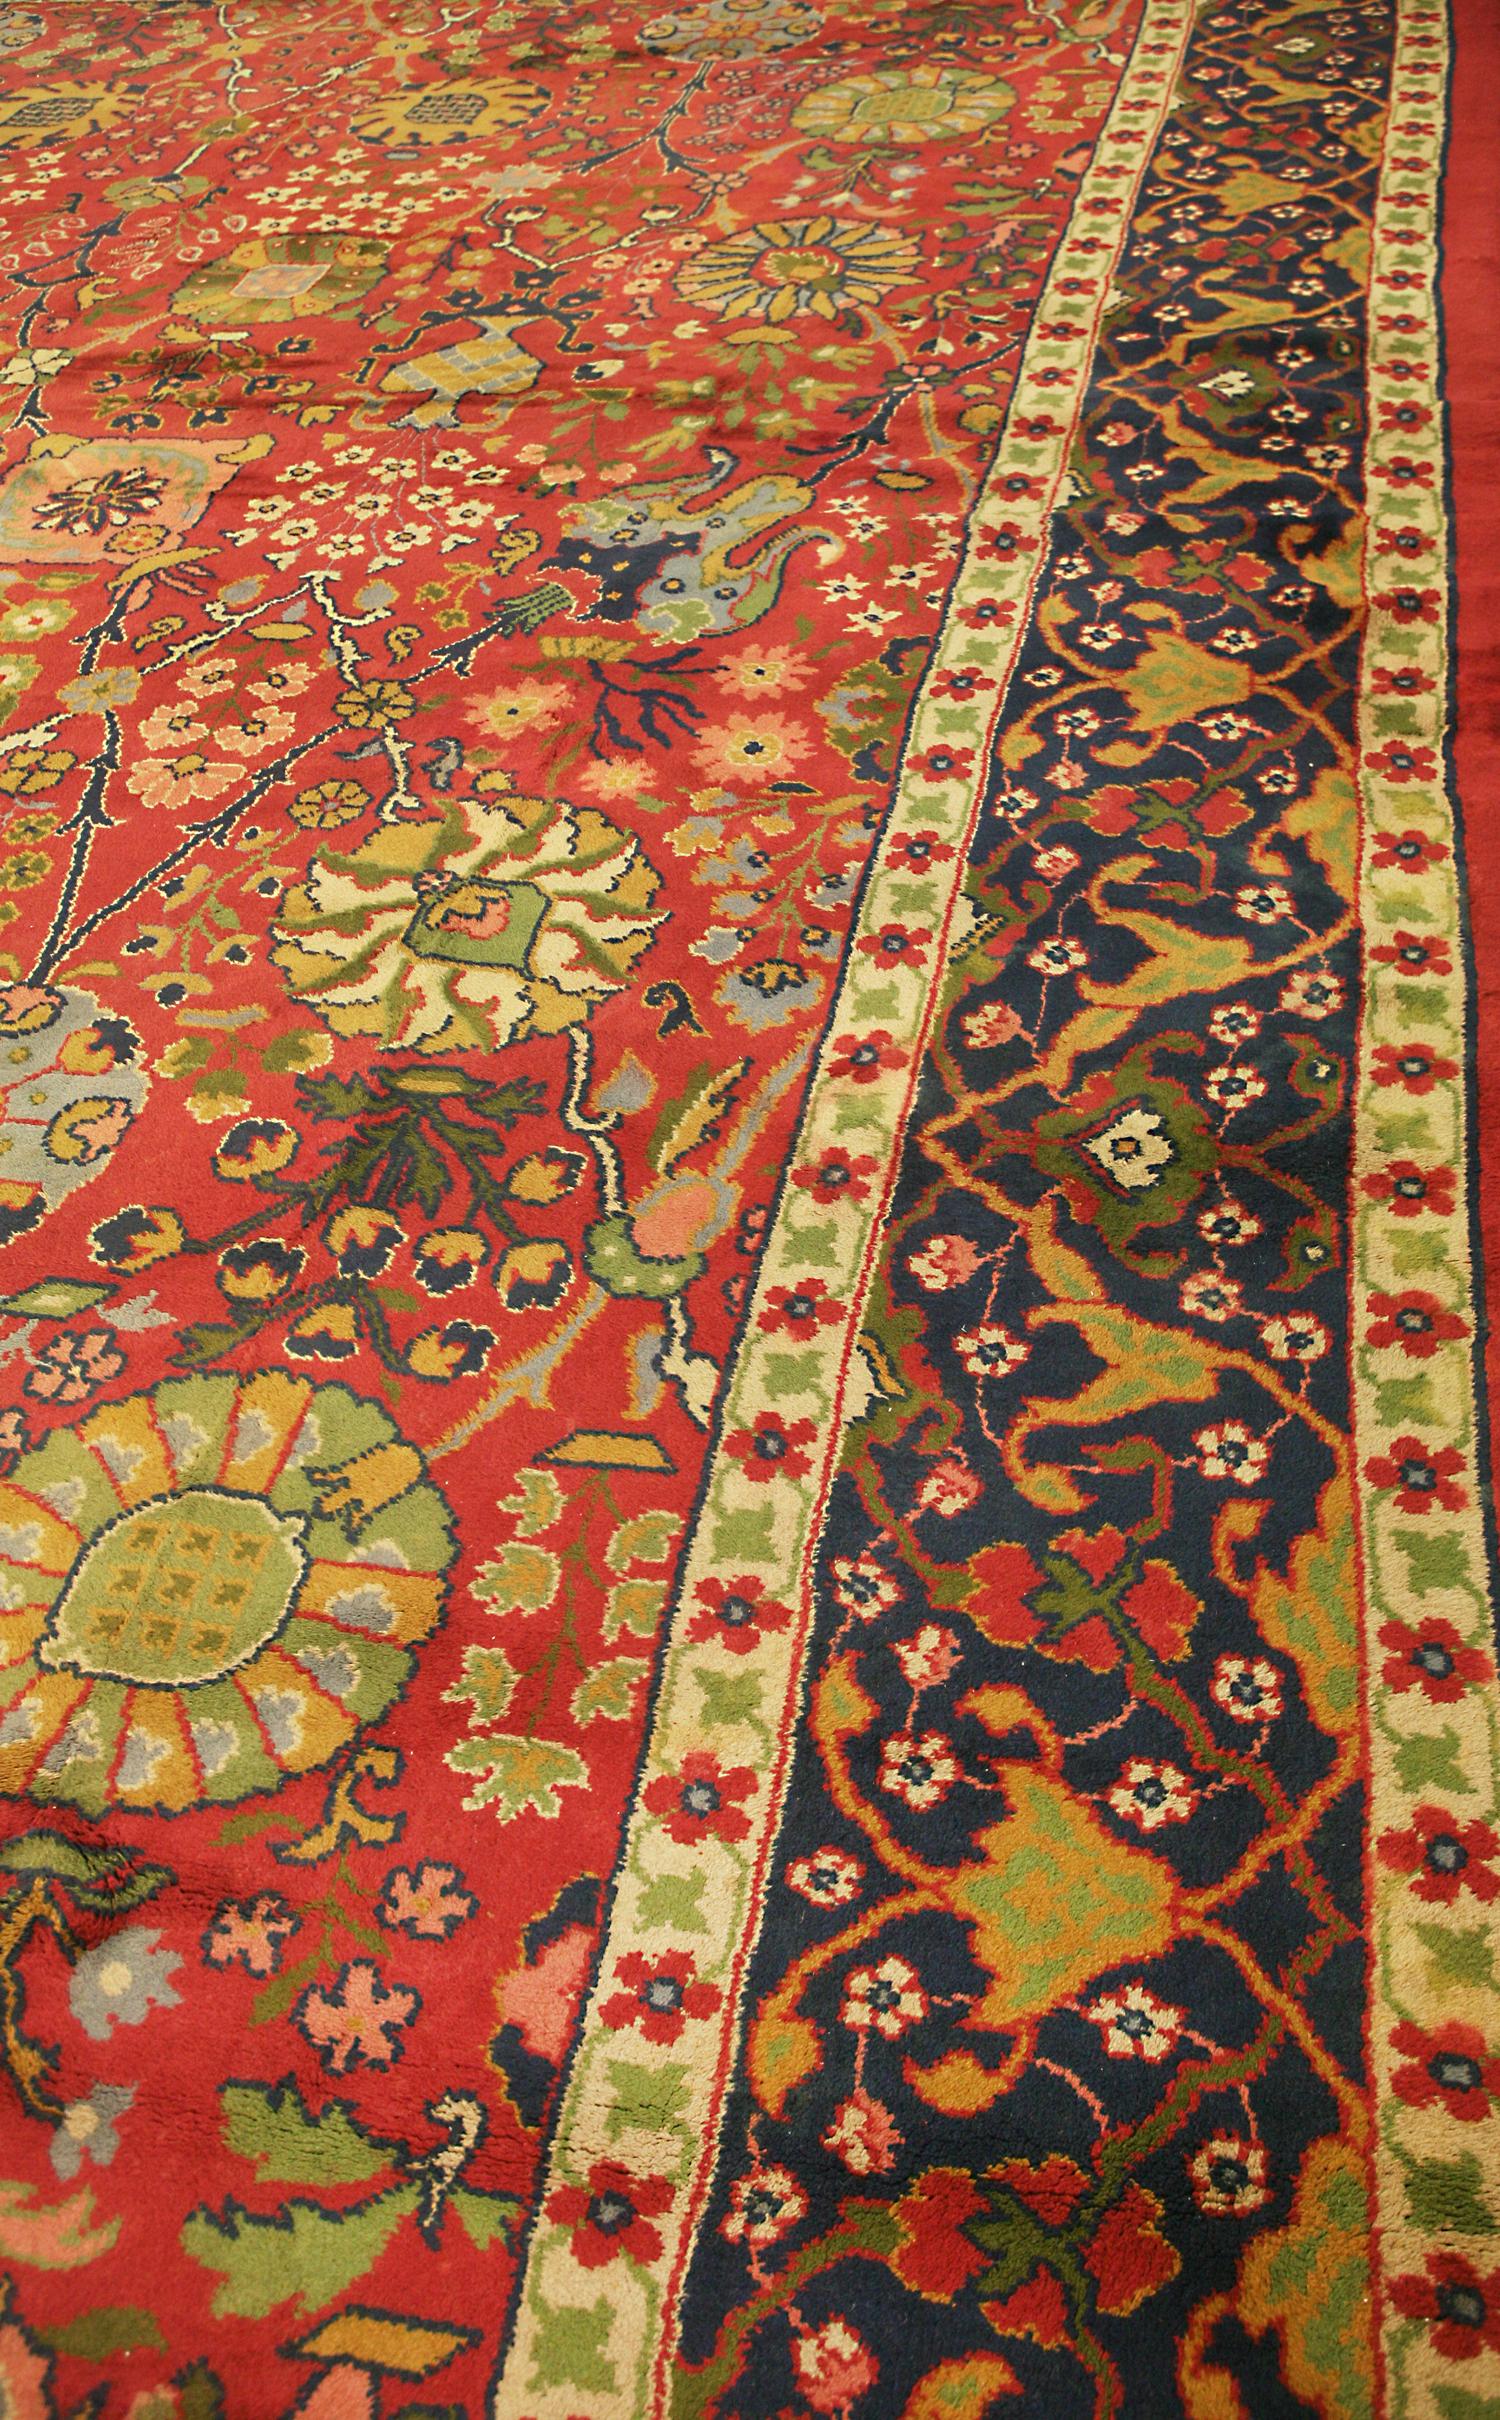 Hand-Knotted Circa 1920 Oversized Antique English Wool Donegal Carpet, Red Field For Sale